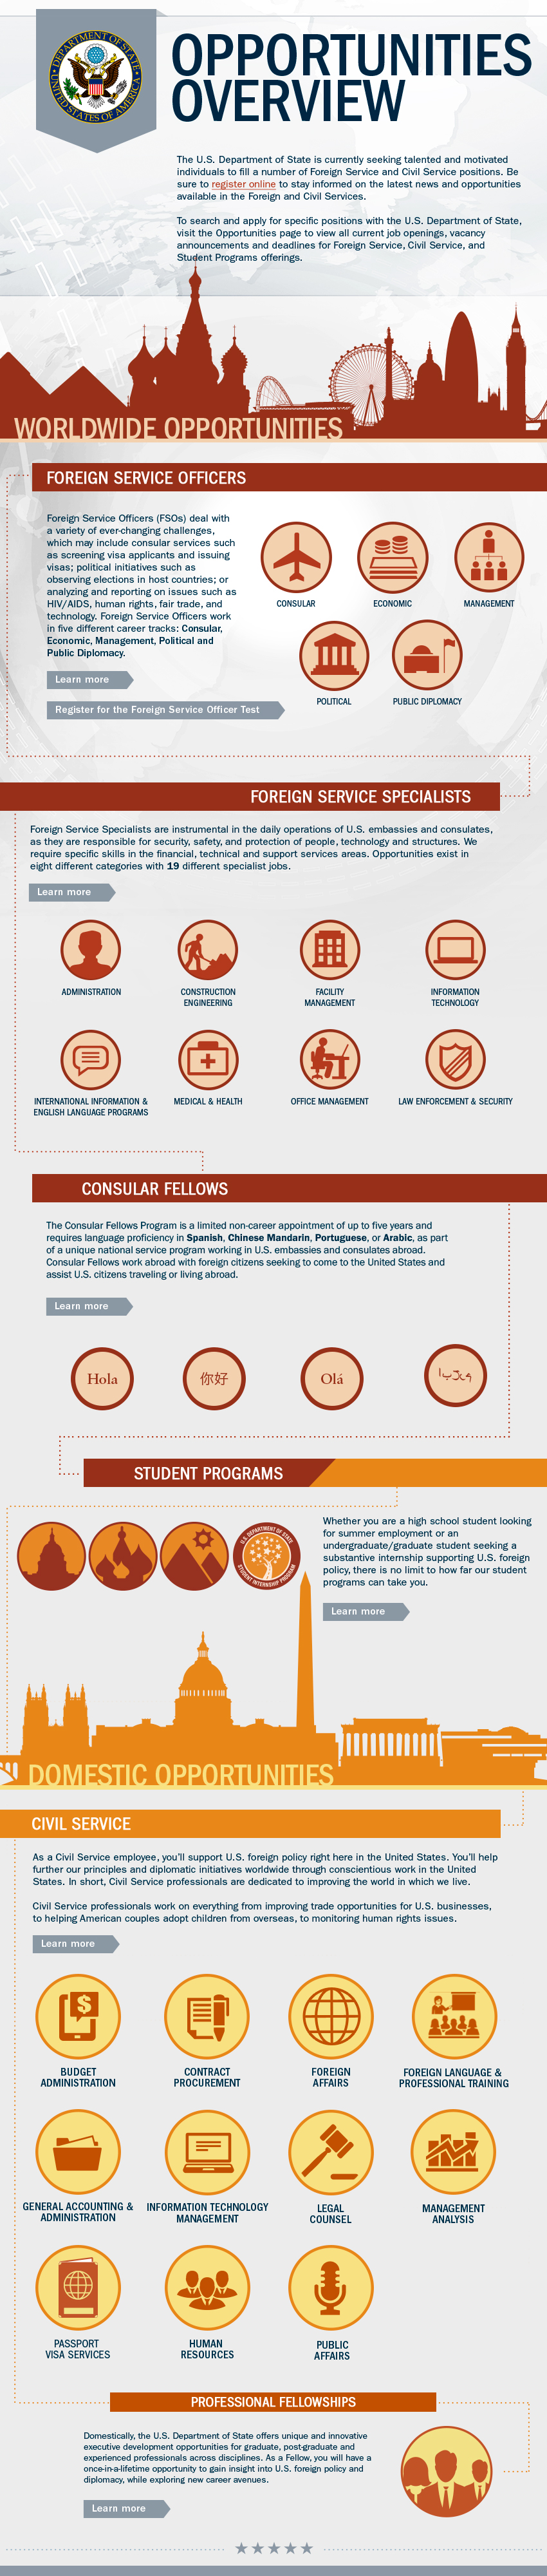 Careers Overview Infographic